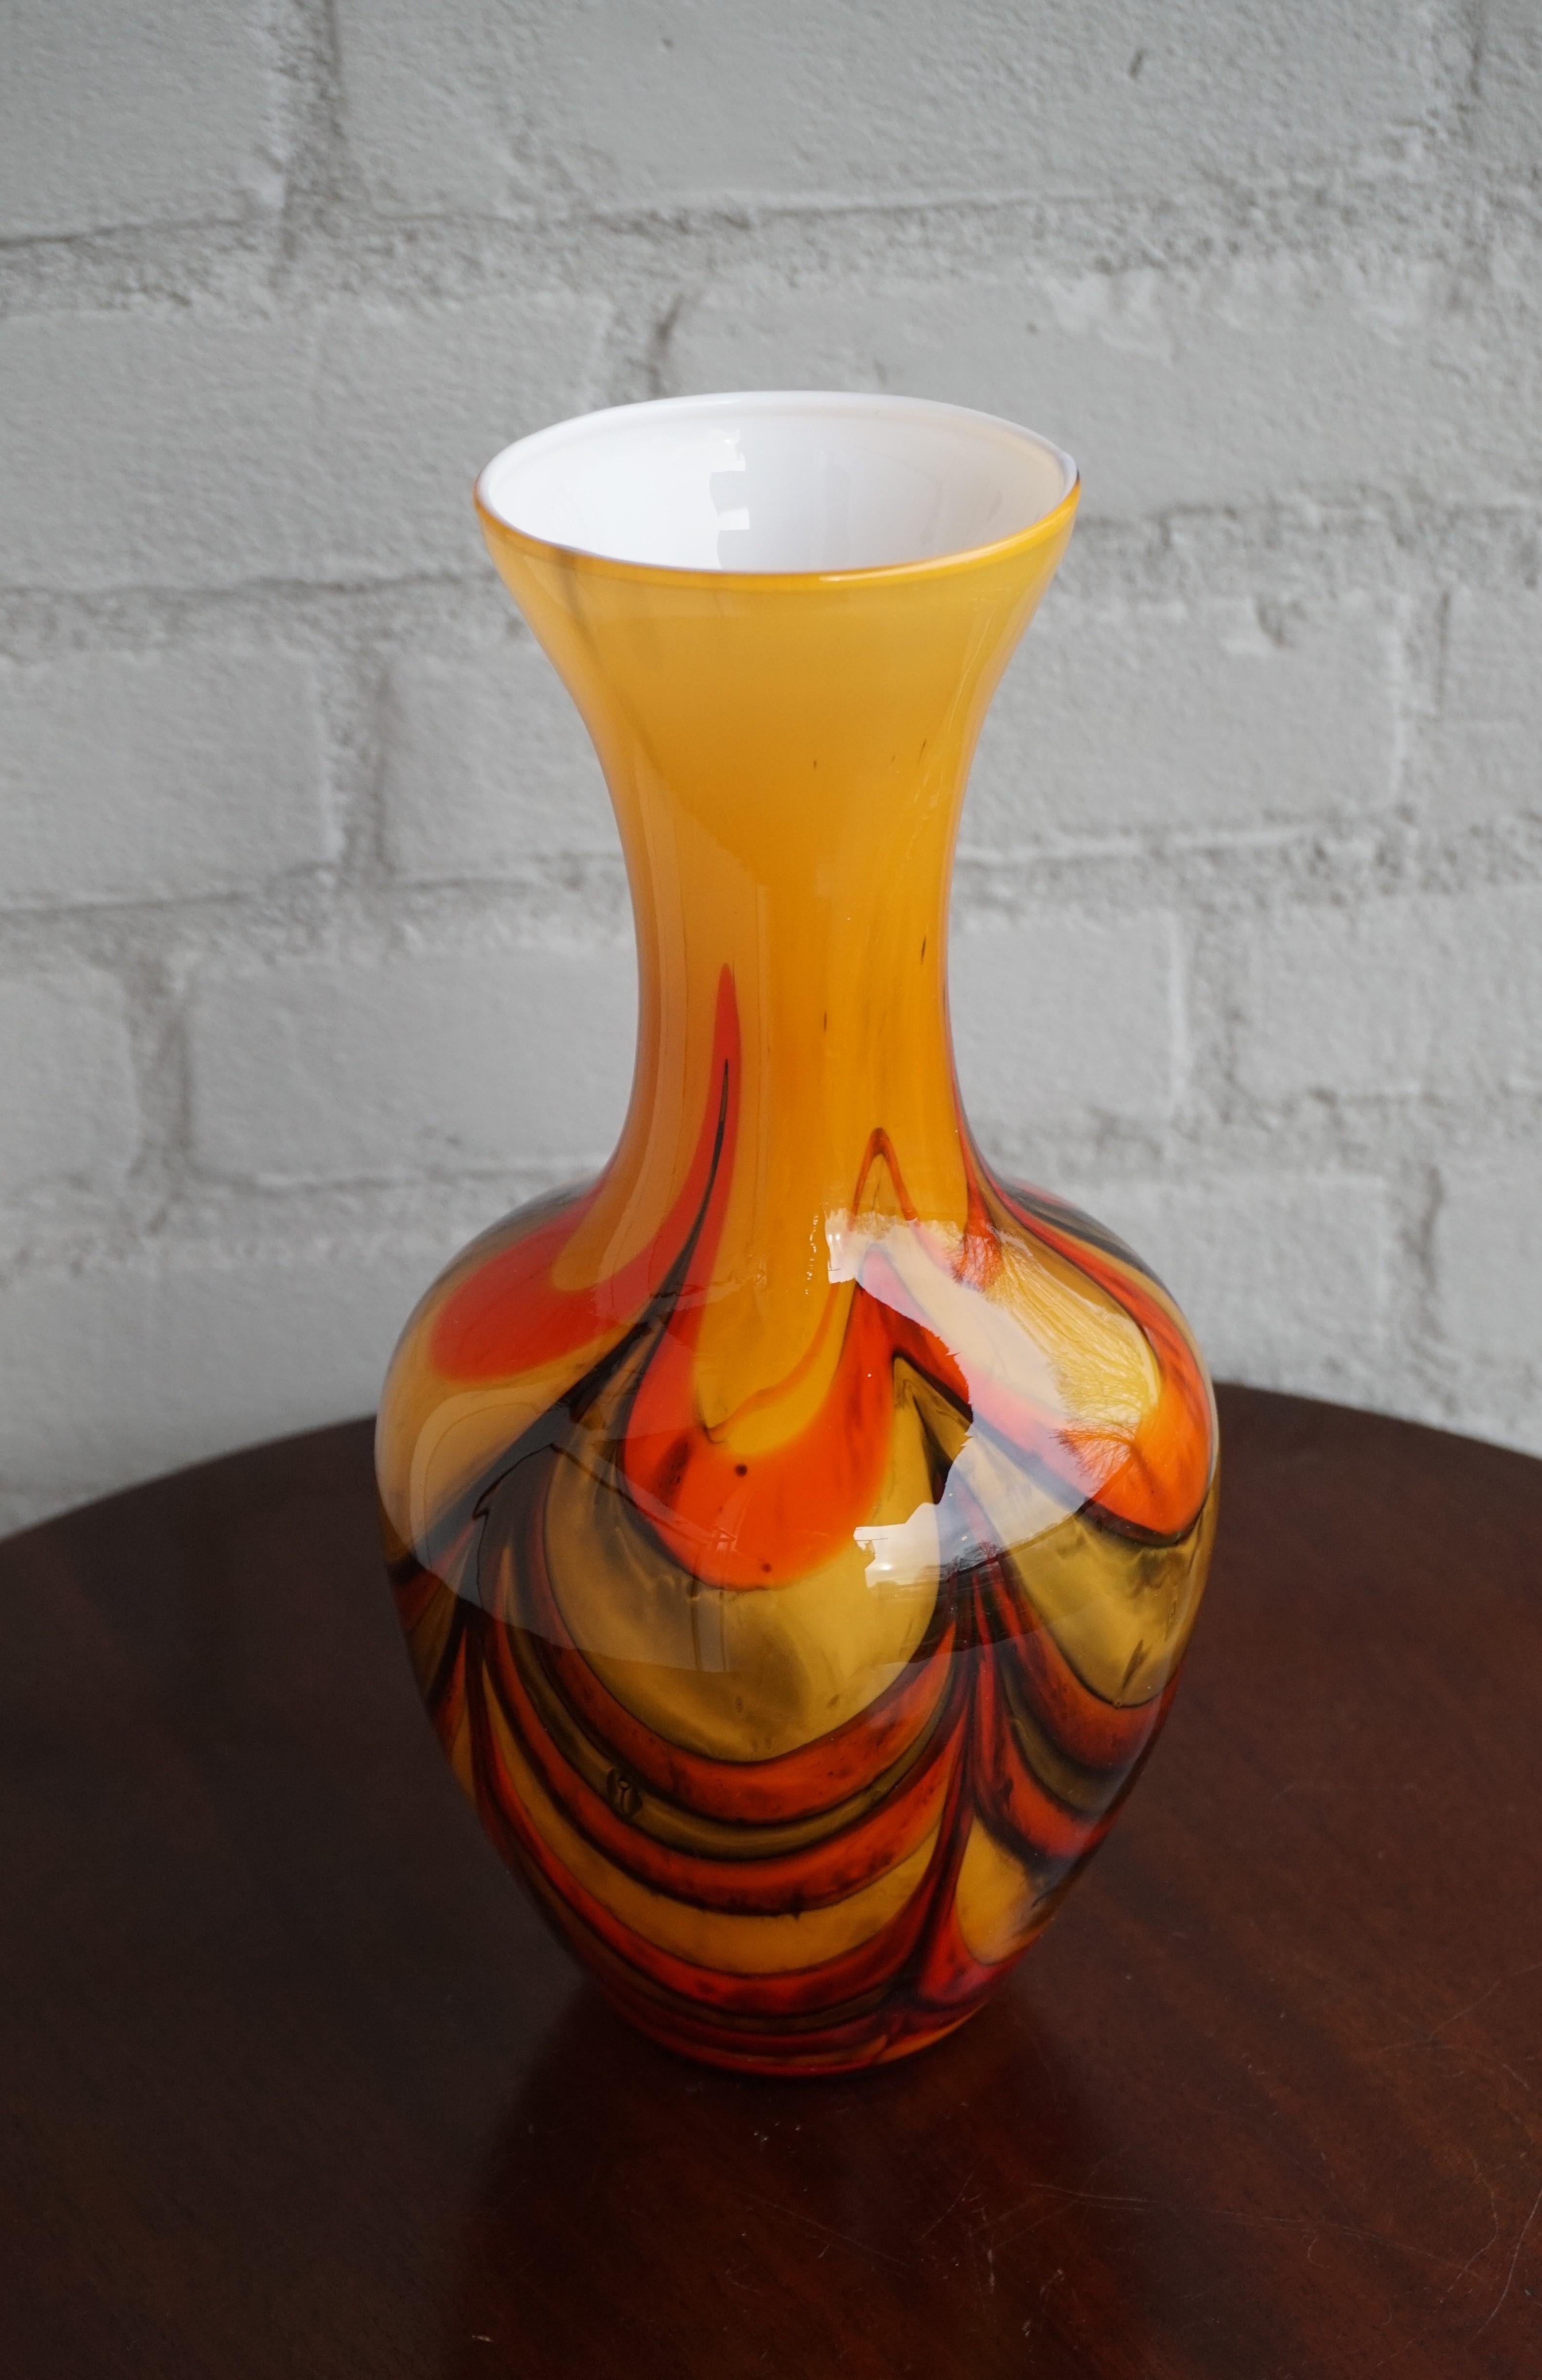 Beautiful art glass vase from the midcentury era.

Looking at this remarkable vase one might think that it was never made to be used. It is so much more than your average vase that using it would probably only take away the beauty of this mouthblown